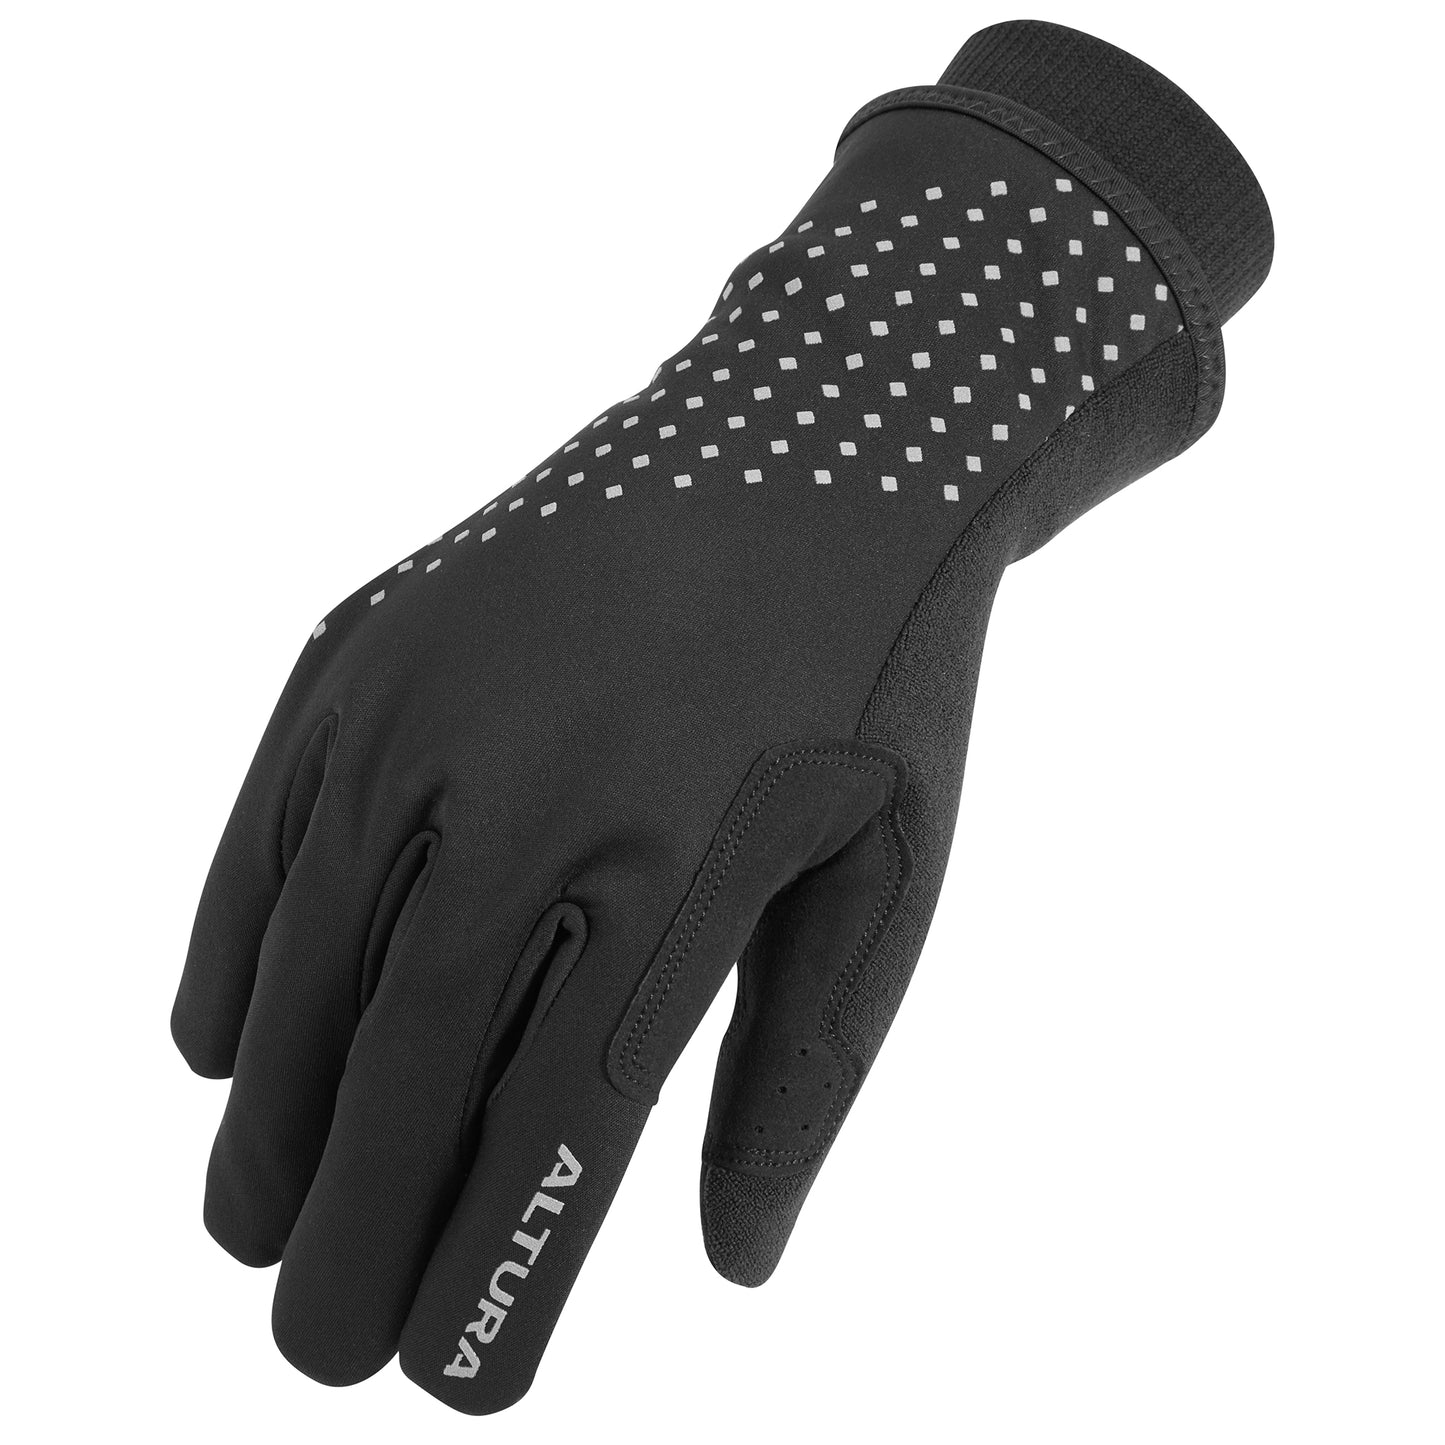 ALTURA NIGHTVISION UNISEX WATERPROOF INSULATED CYCLING GLOVES